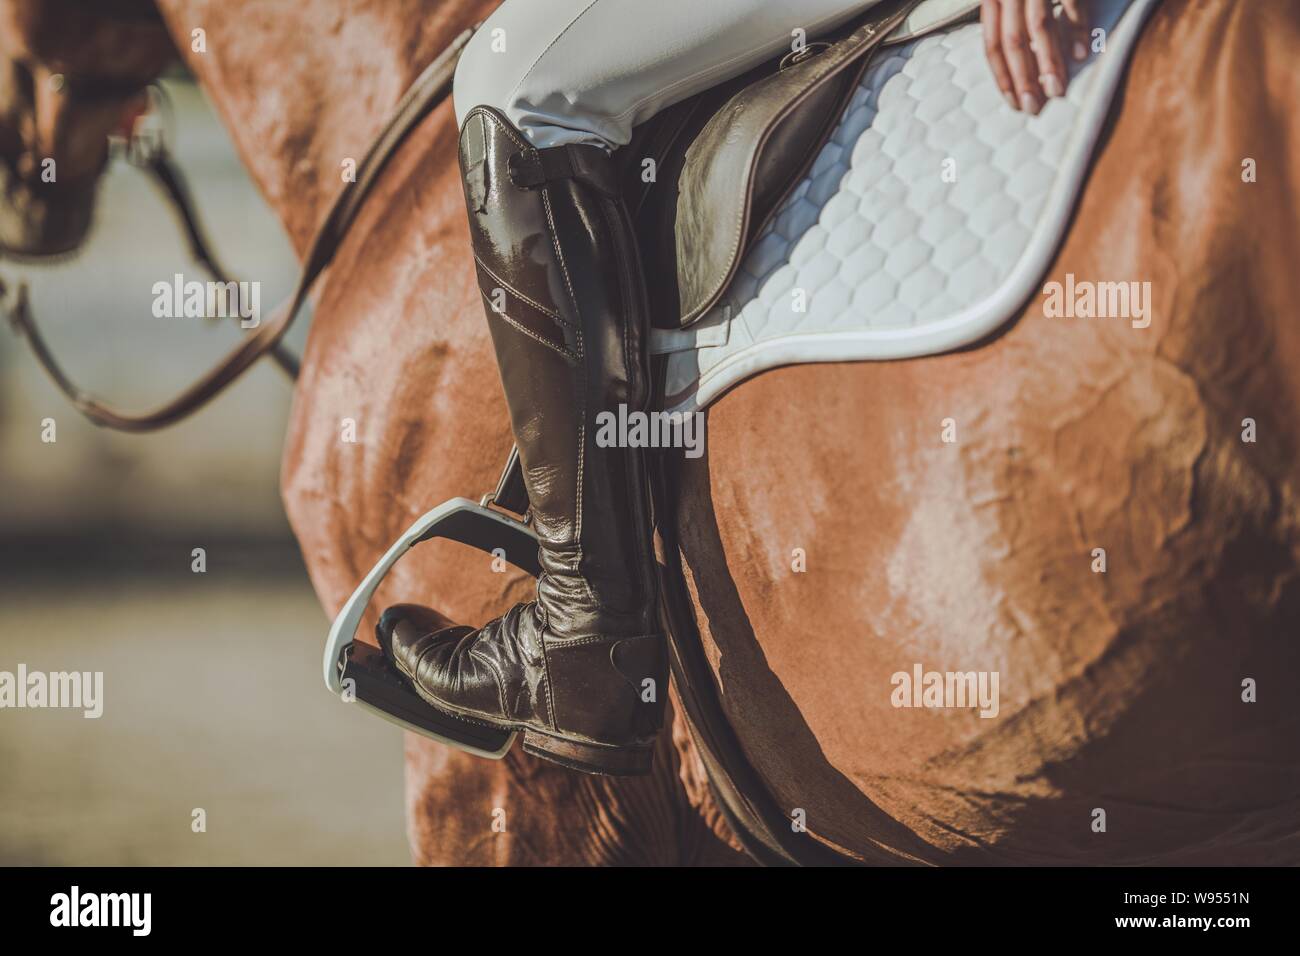 Horse Riding Stirrups and Shoes. Equestrian Accessories and Equipment. Closeup Photo. Stock Photo